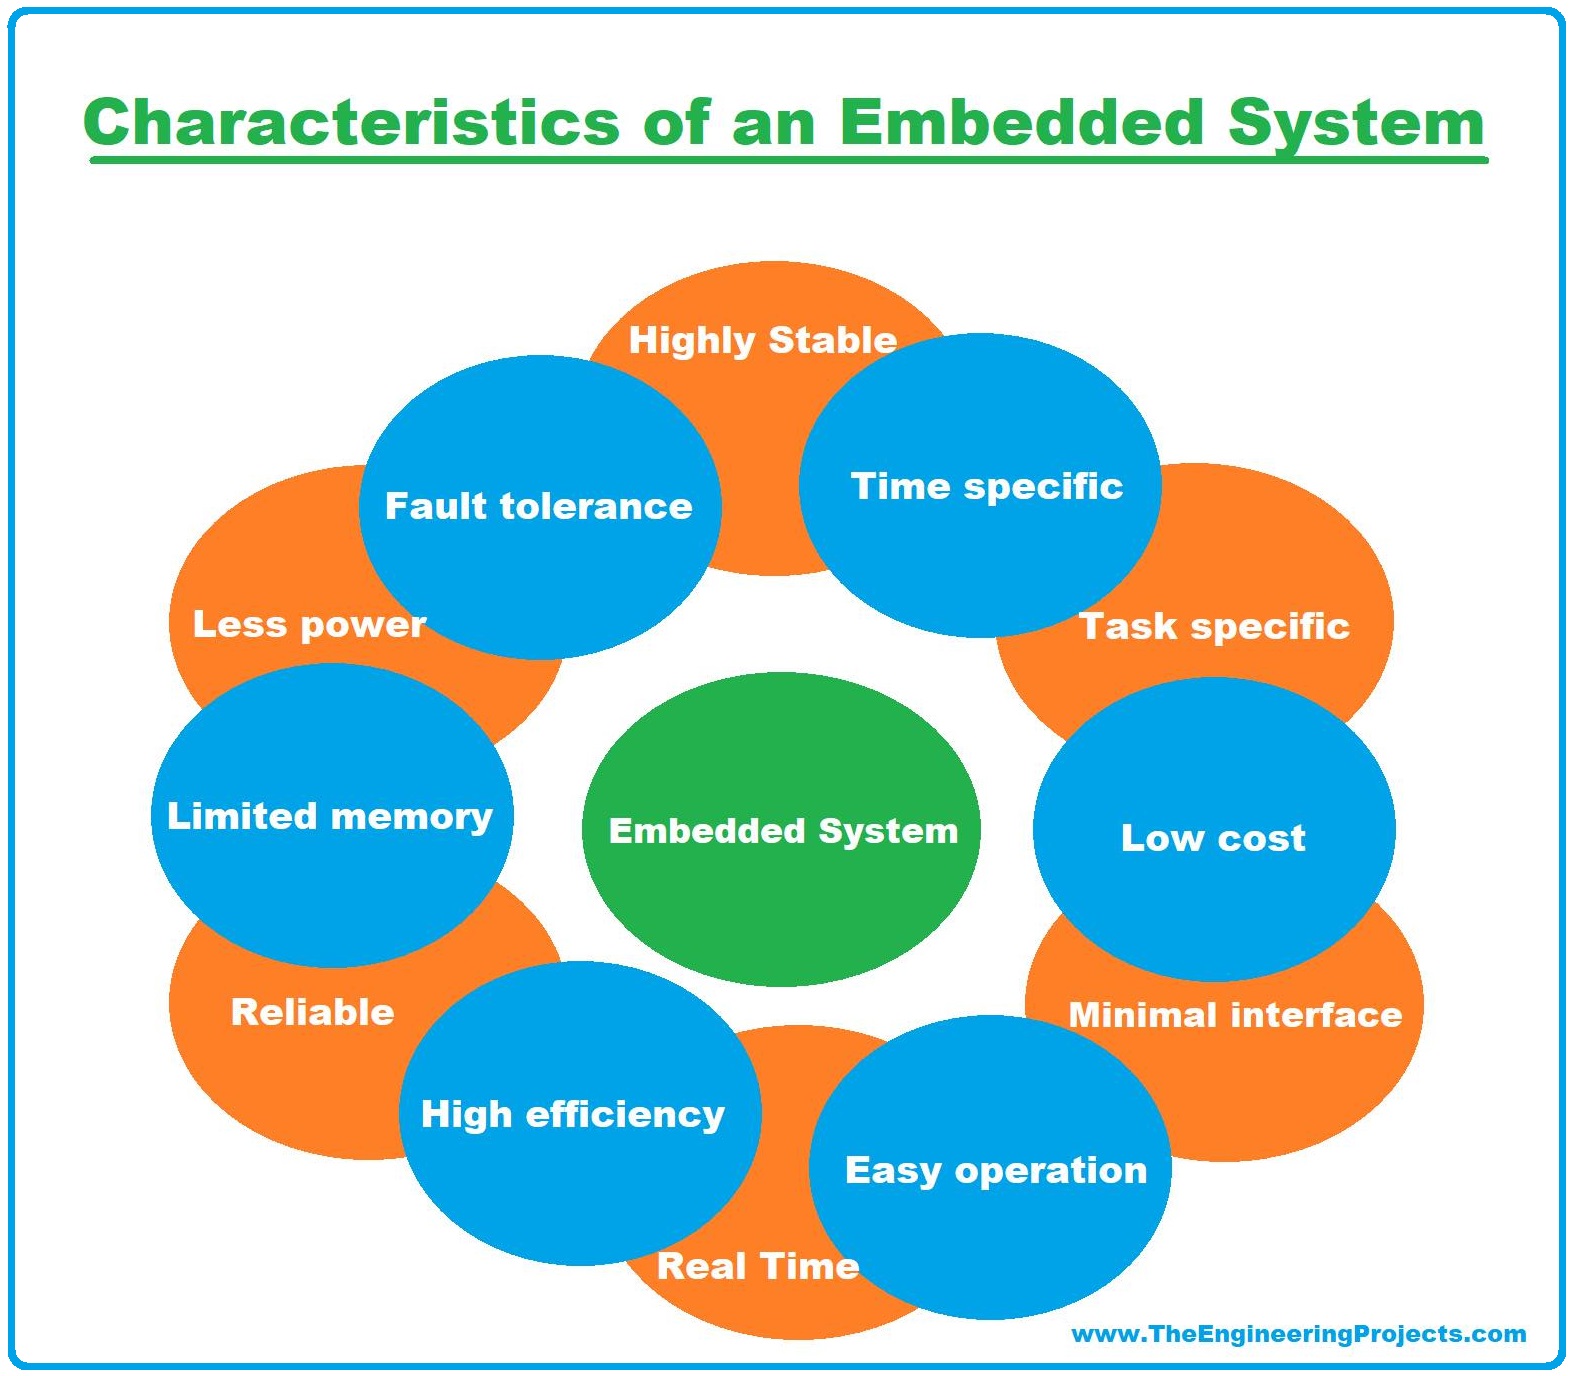 Embedded Systems, what is Embedded Systems, definition of Embedded Systems, Characteristics of Embedded Systems, embedded systems characteristics, embedded system characteristics, Components of Embedded System